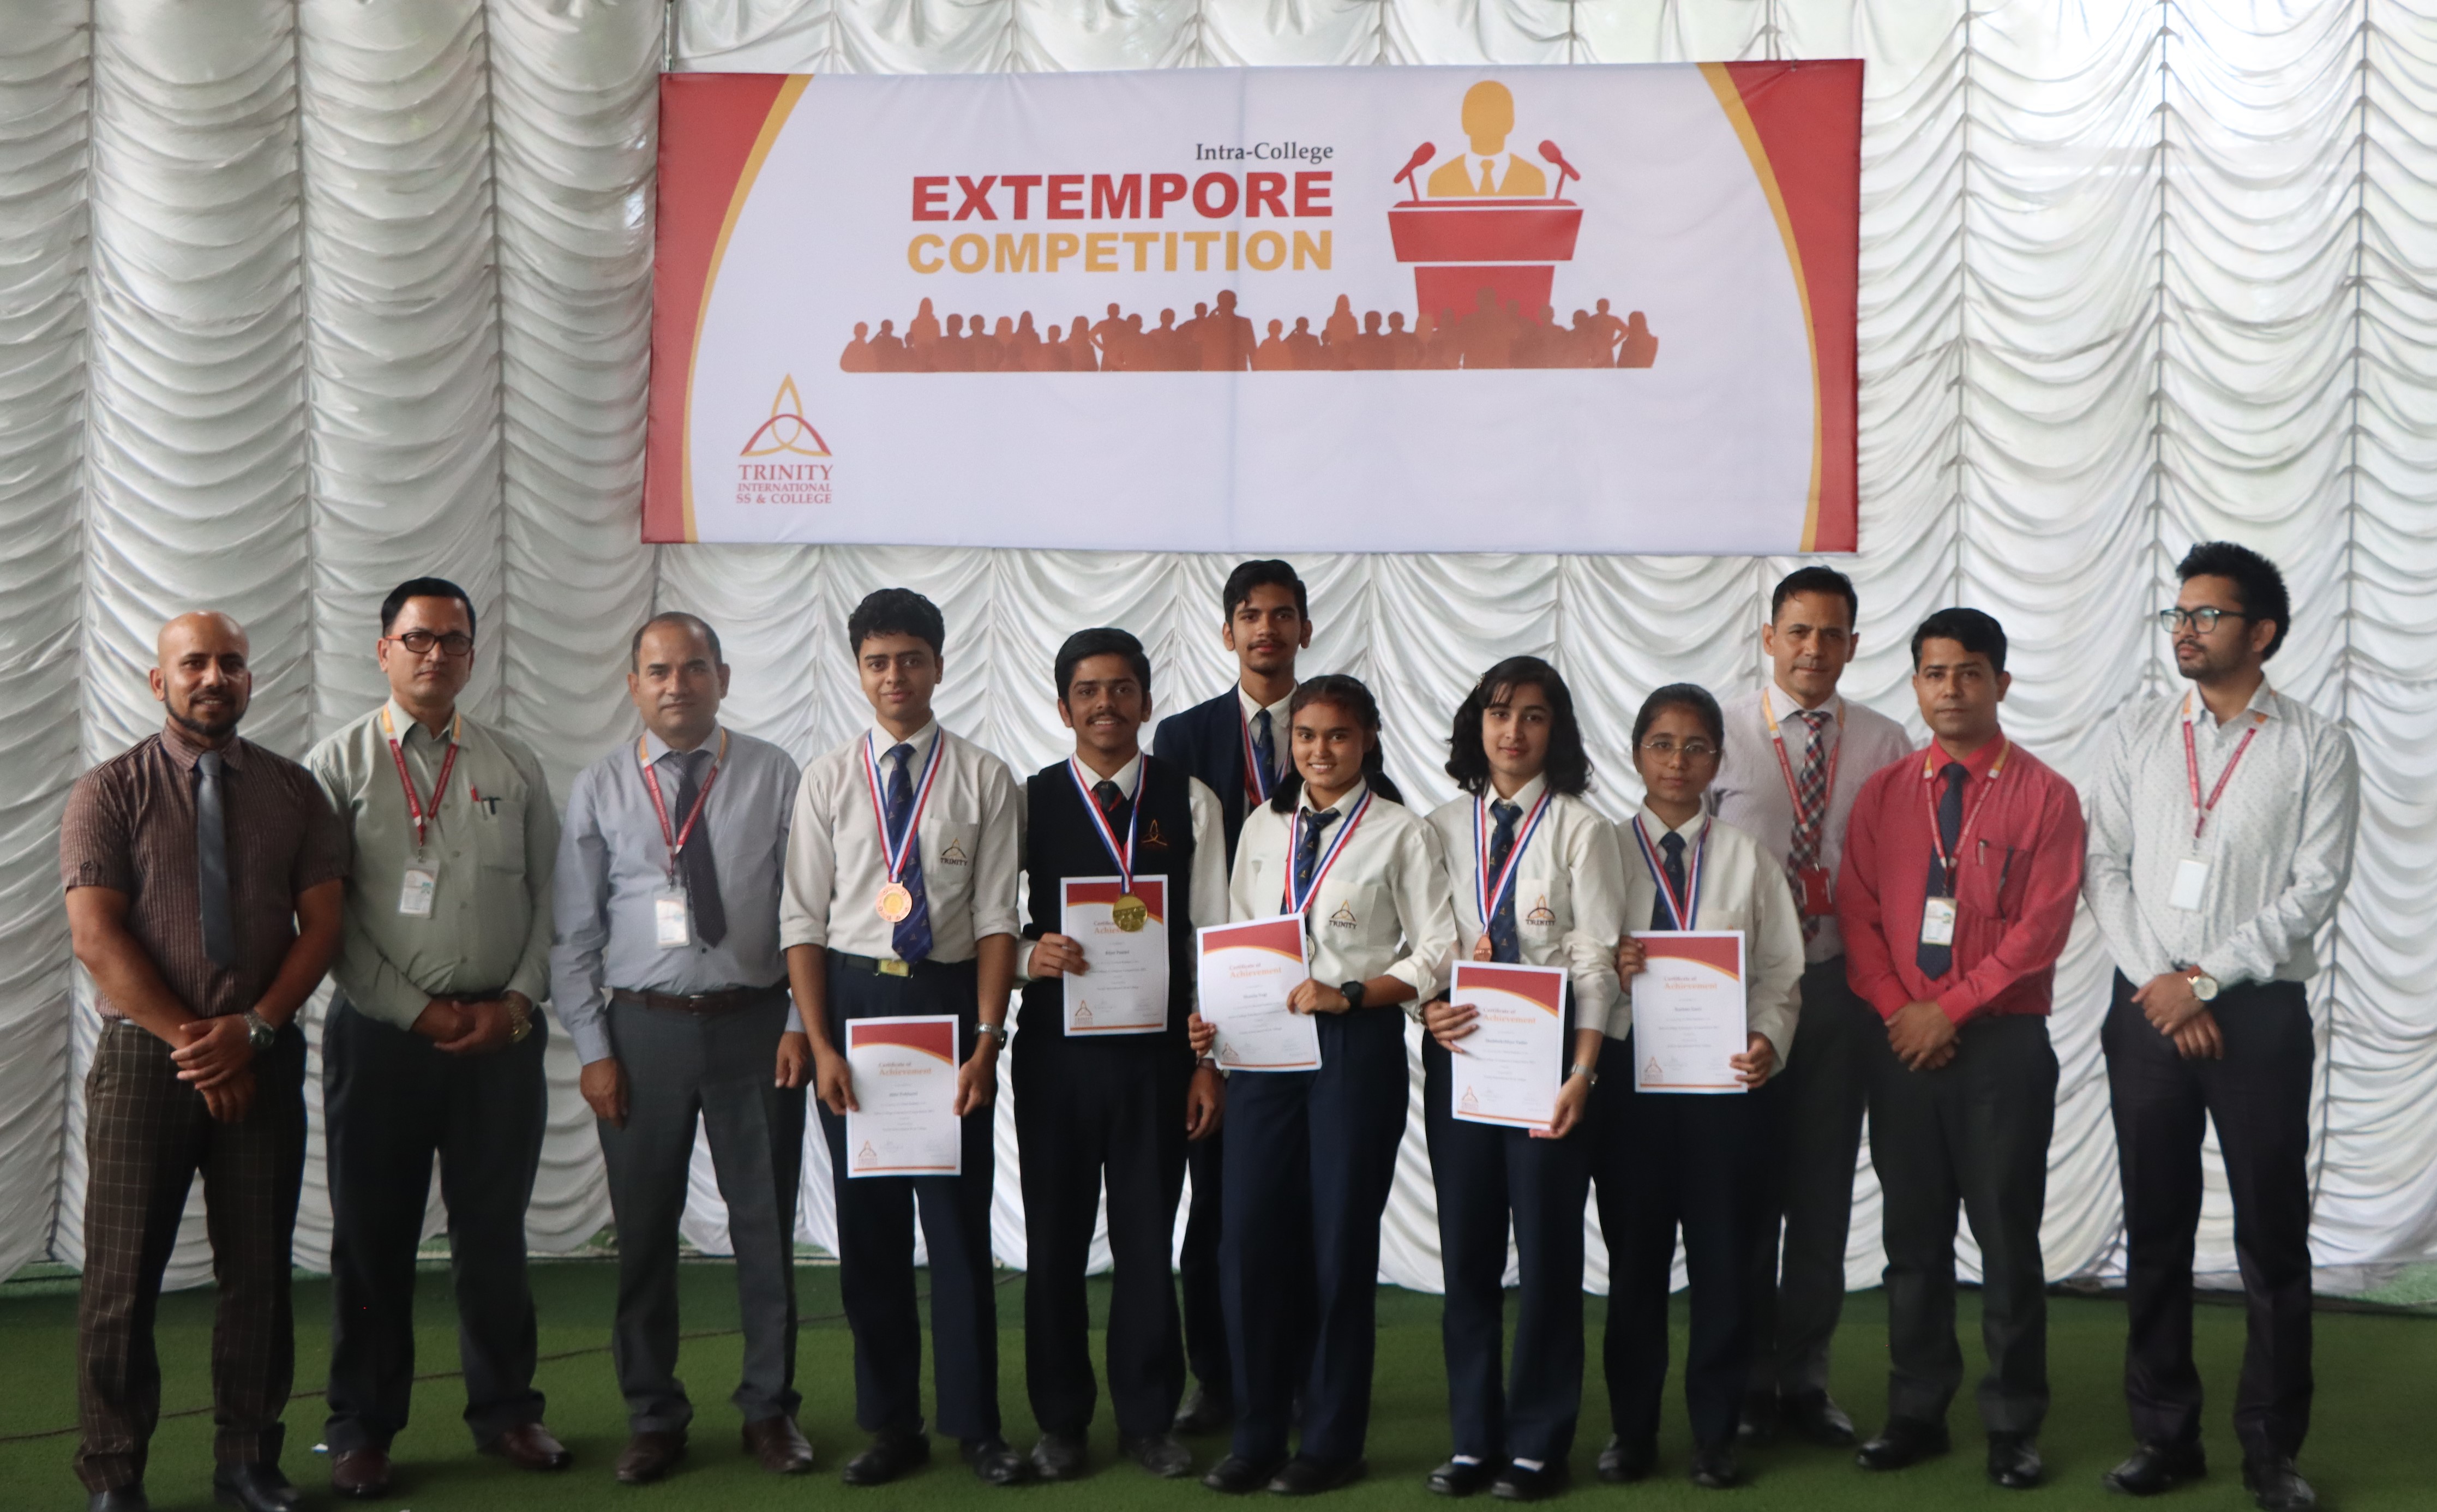 Intra-College Extempore Competition 2023